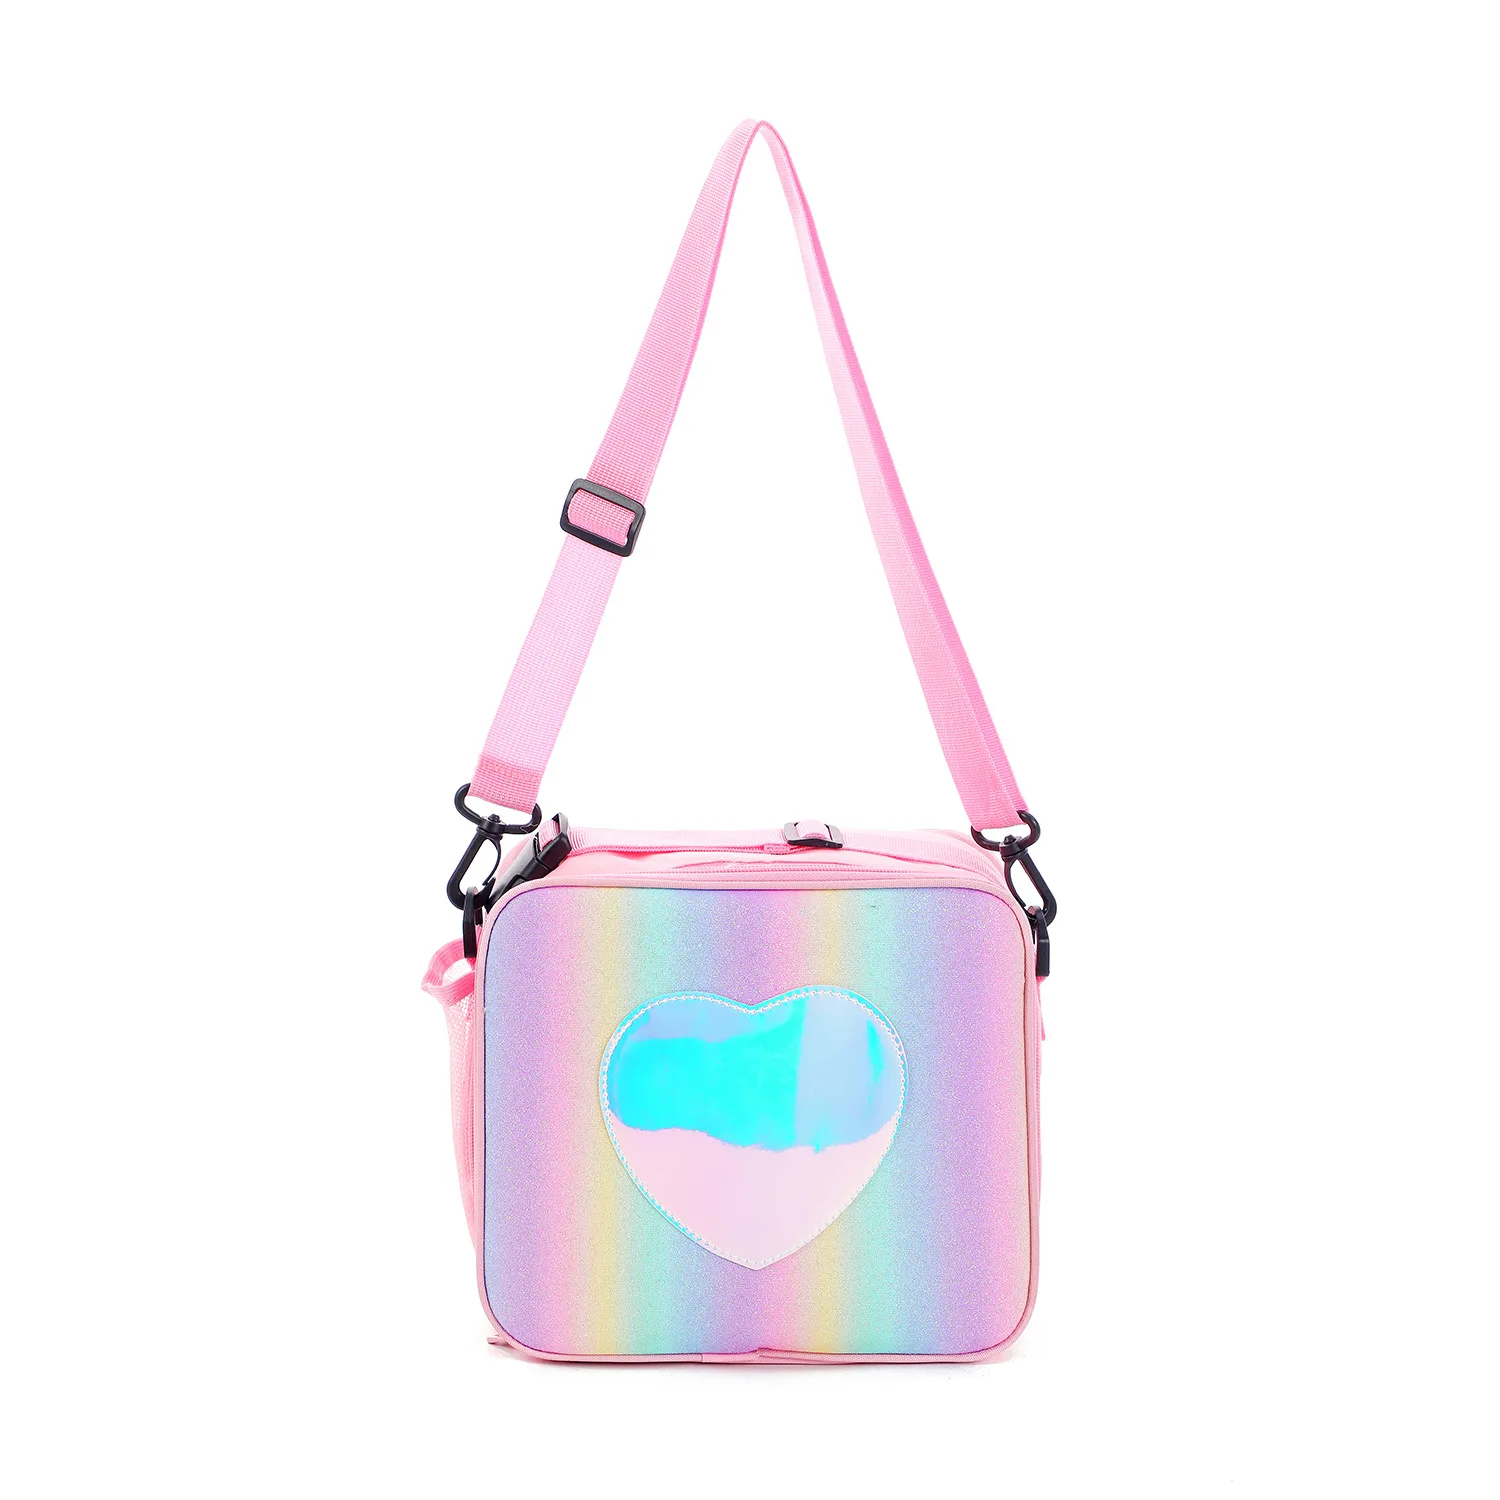 

Outdoor Picnic Rainbow Color Glitter Insulated Lunch Bag Portable Girls Cute Picnic Cooler Bag, Green,pink,purple